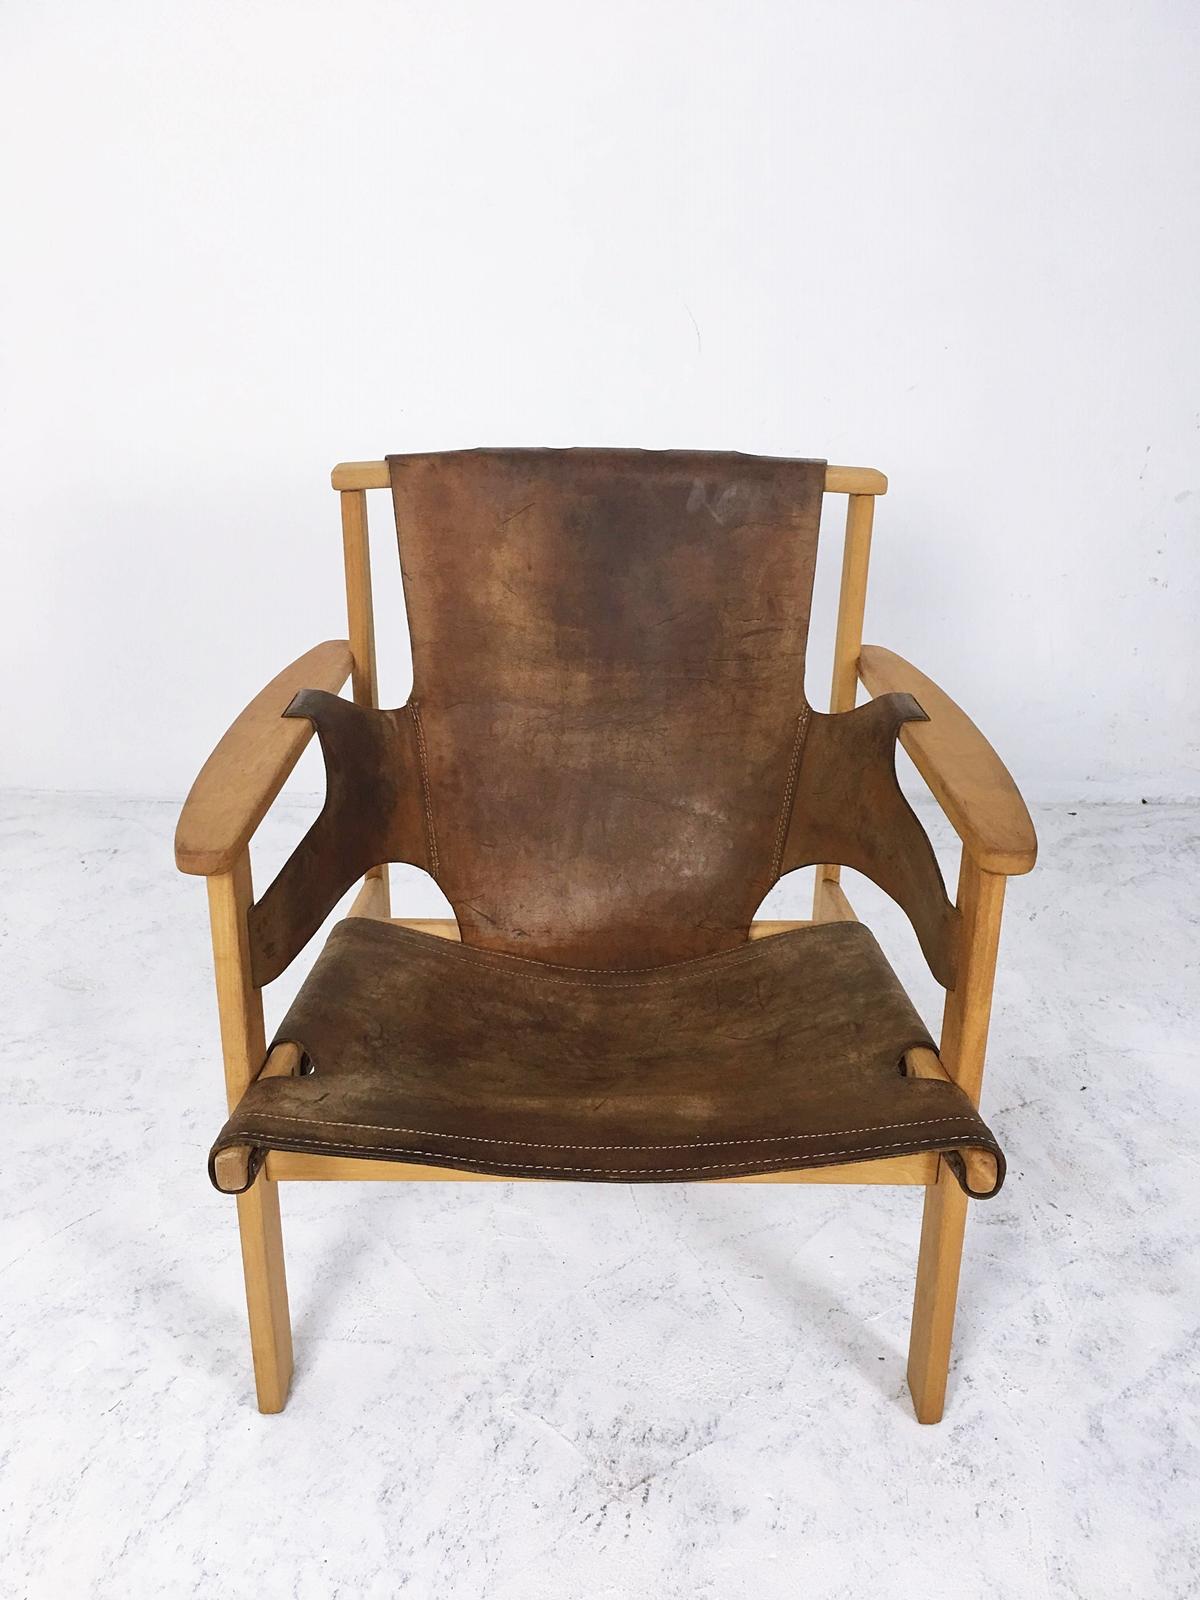 “Trienna” lounge chair by Carl-Axel Acking, made from oak and leather. This model was designed in 1957 and presented at the Milano Triennial that year, as part of the Swedish exhibit.
 Manufactured in Hungary 
Some Imperfections Minor losses.